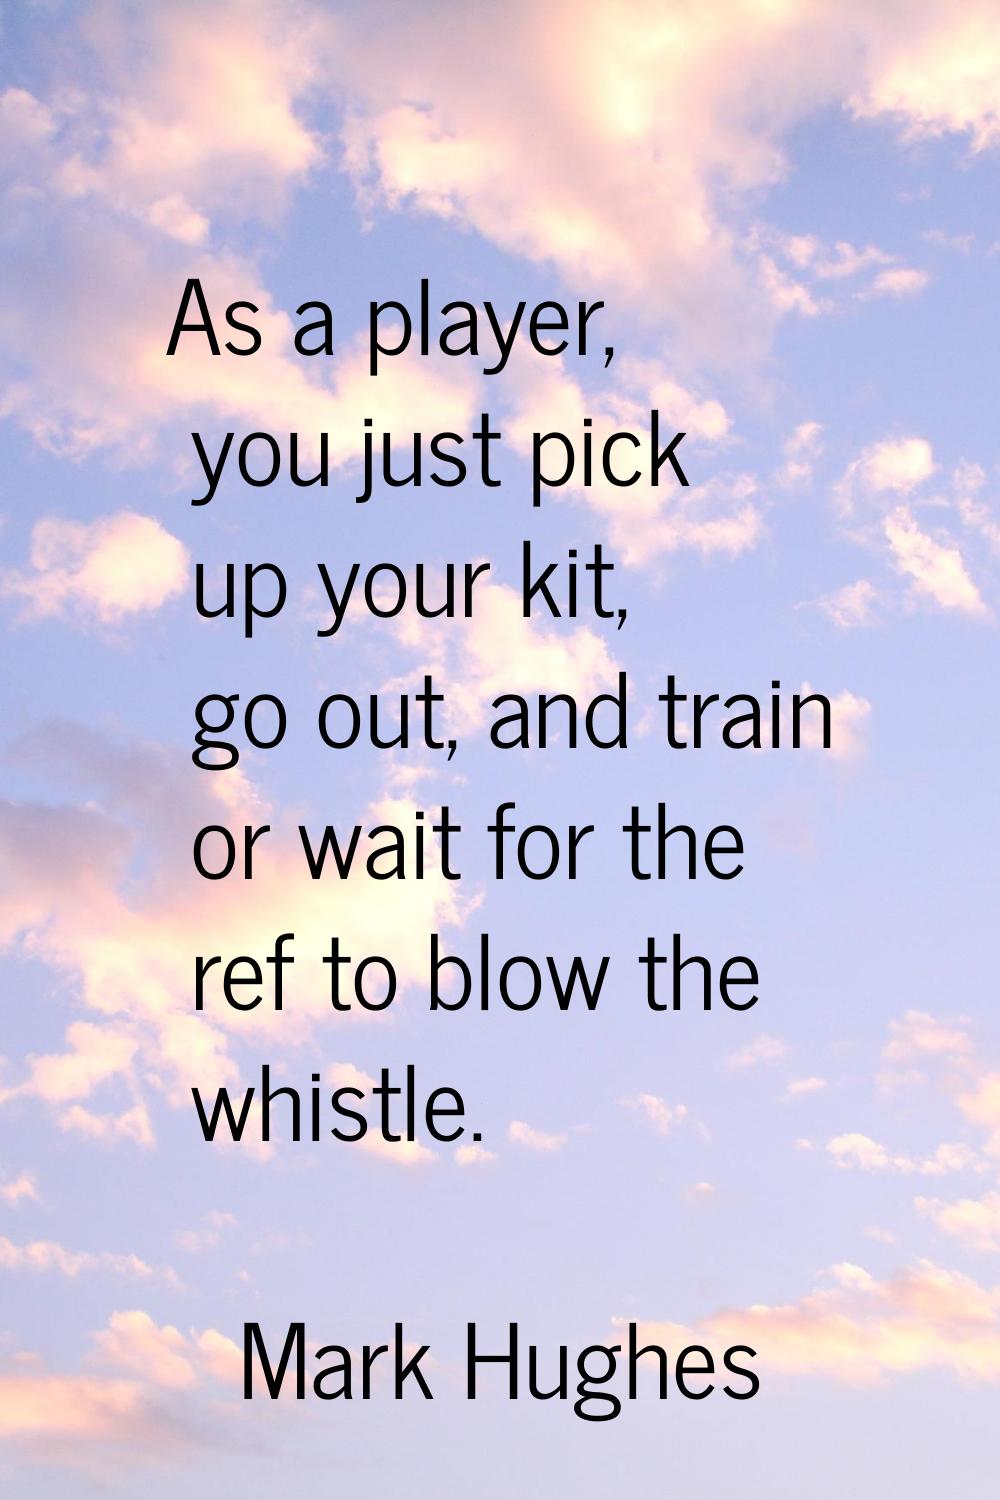 As a player, you just pick up your kit, go out, and train or wait for the ref to blow the whistle.